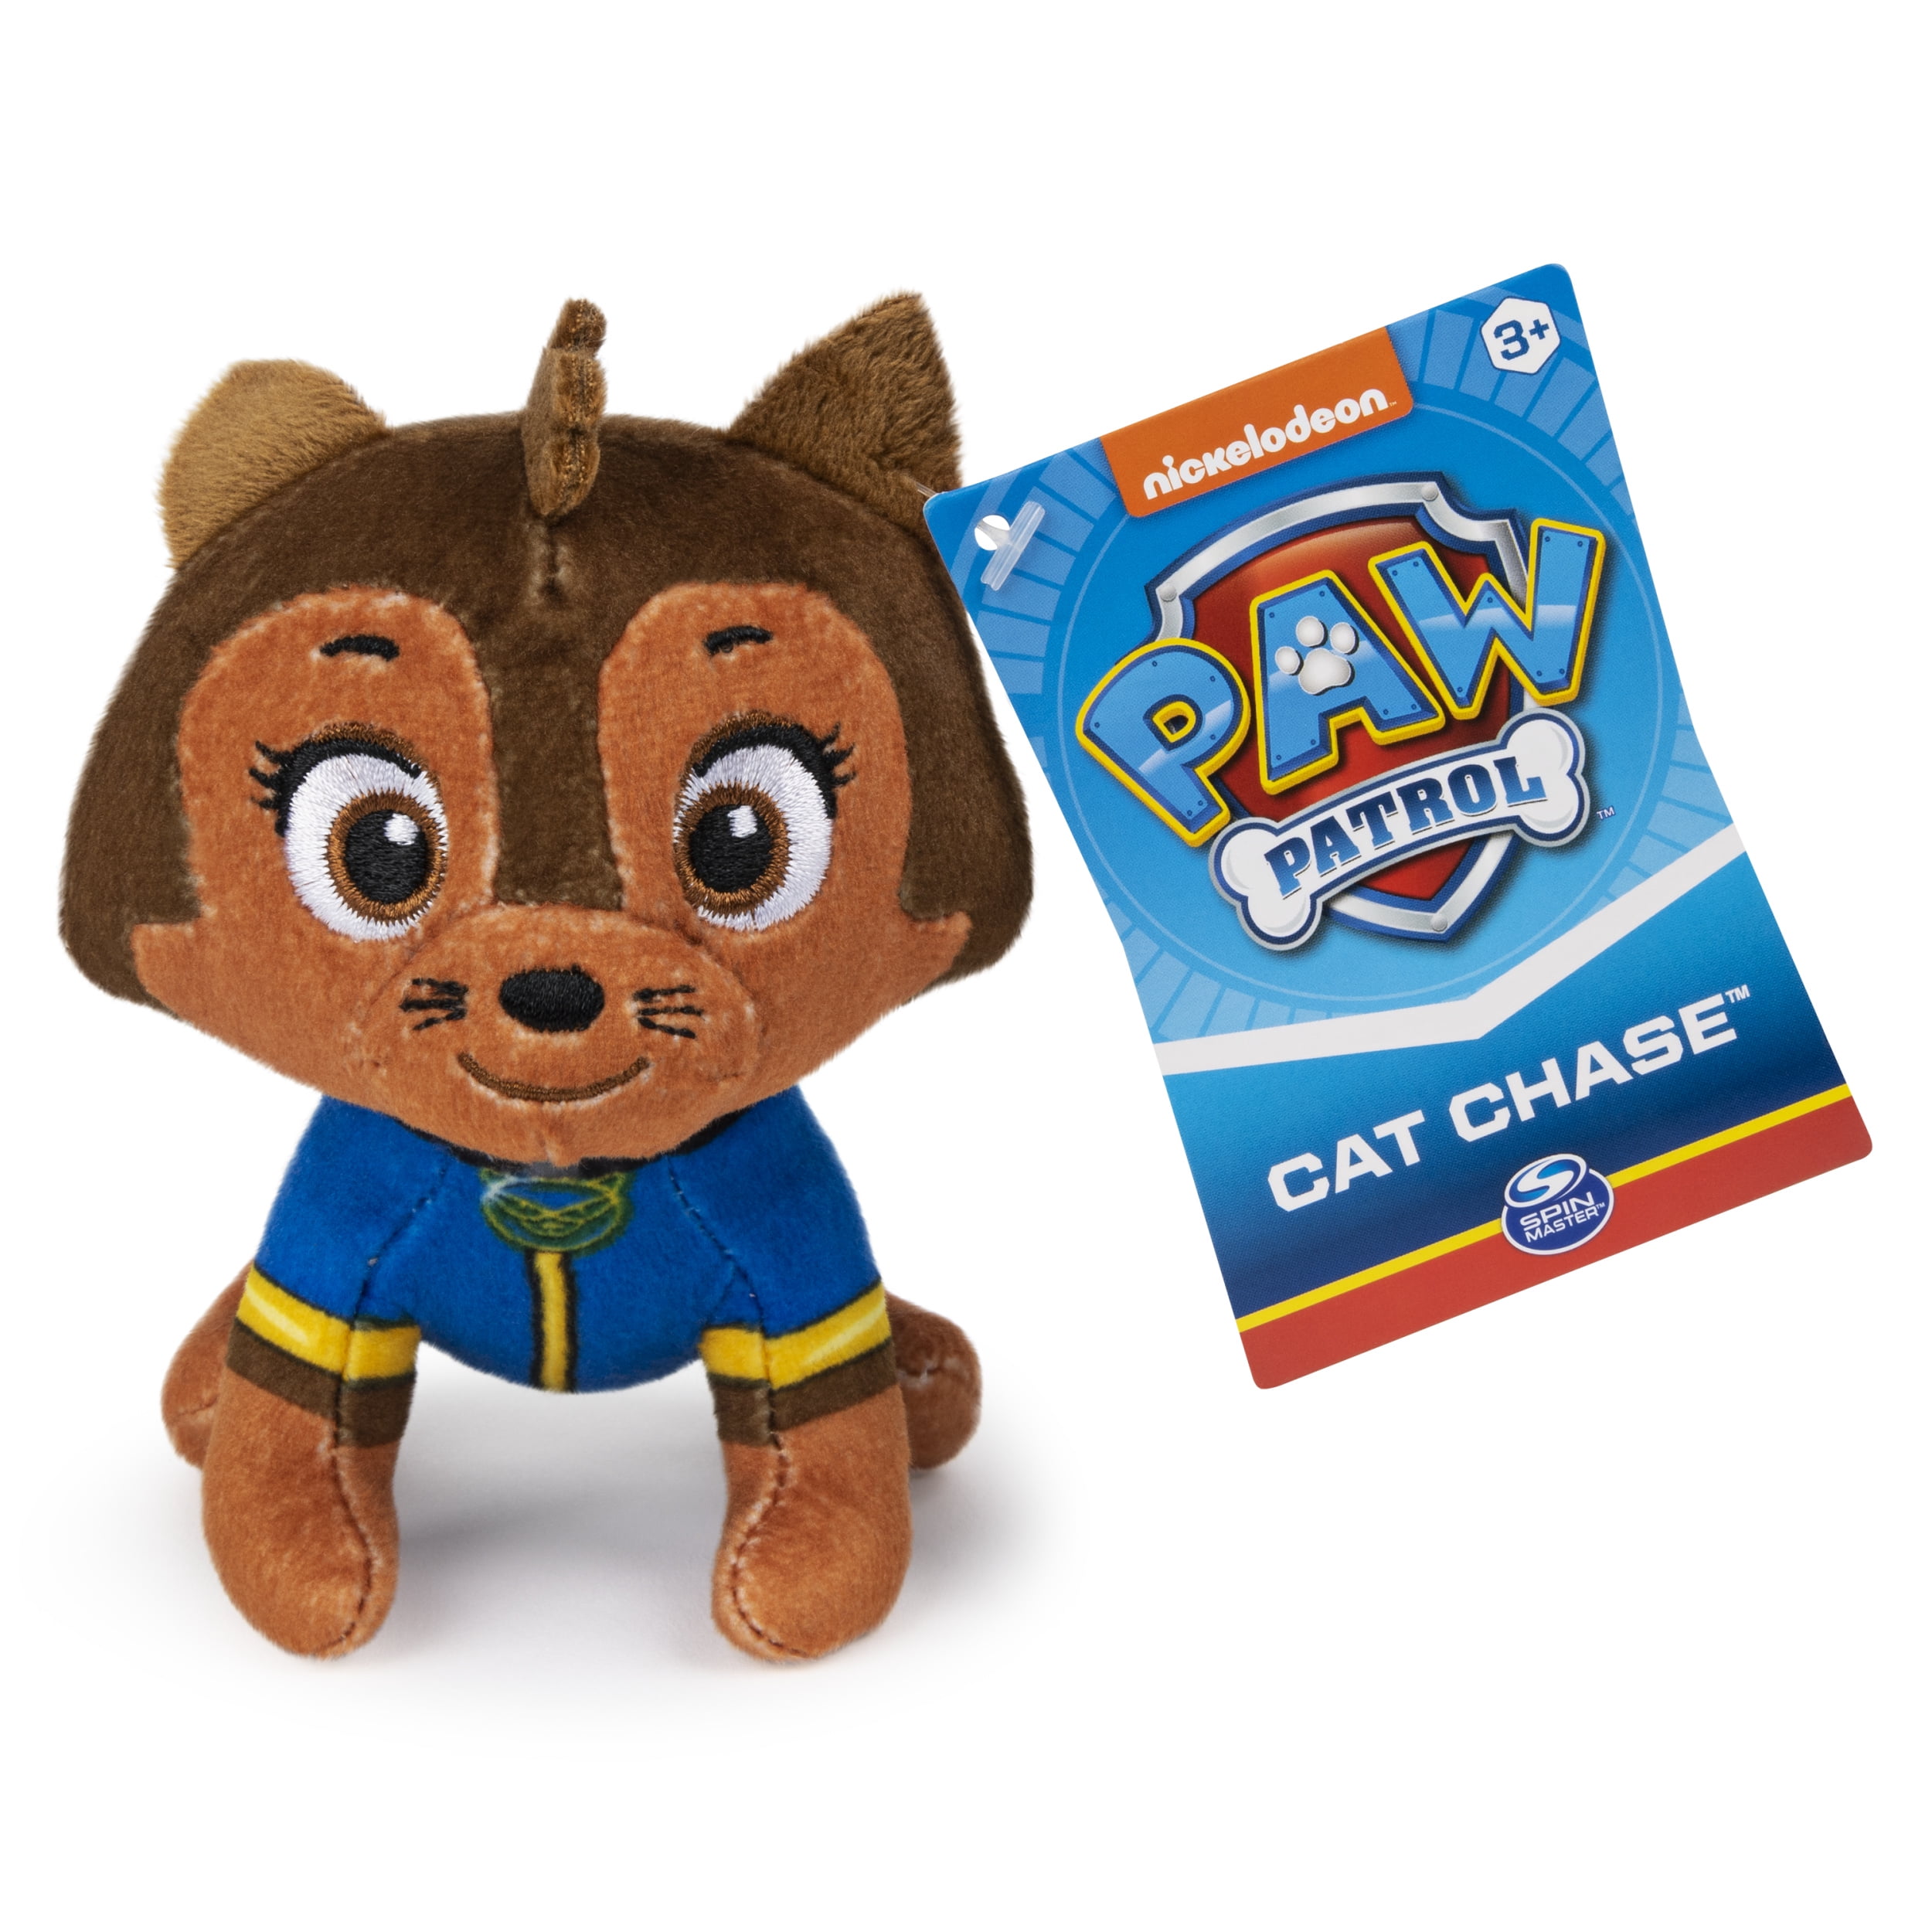 Paw Patrol 5” Cat Chase Mini Plush Pup For Ages 3 And Up